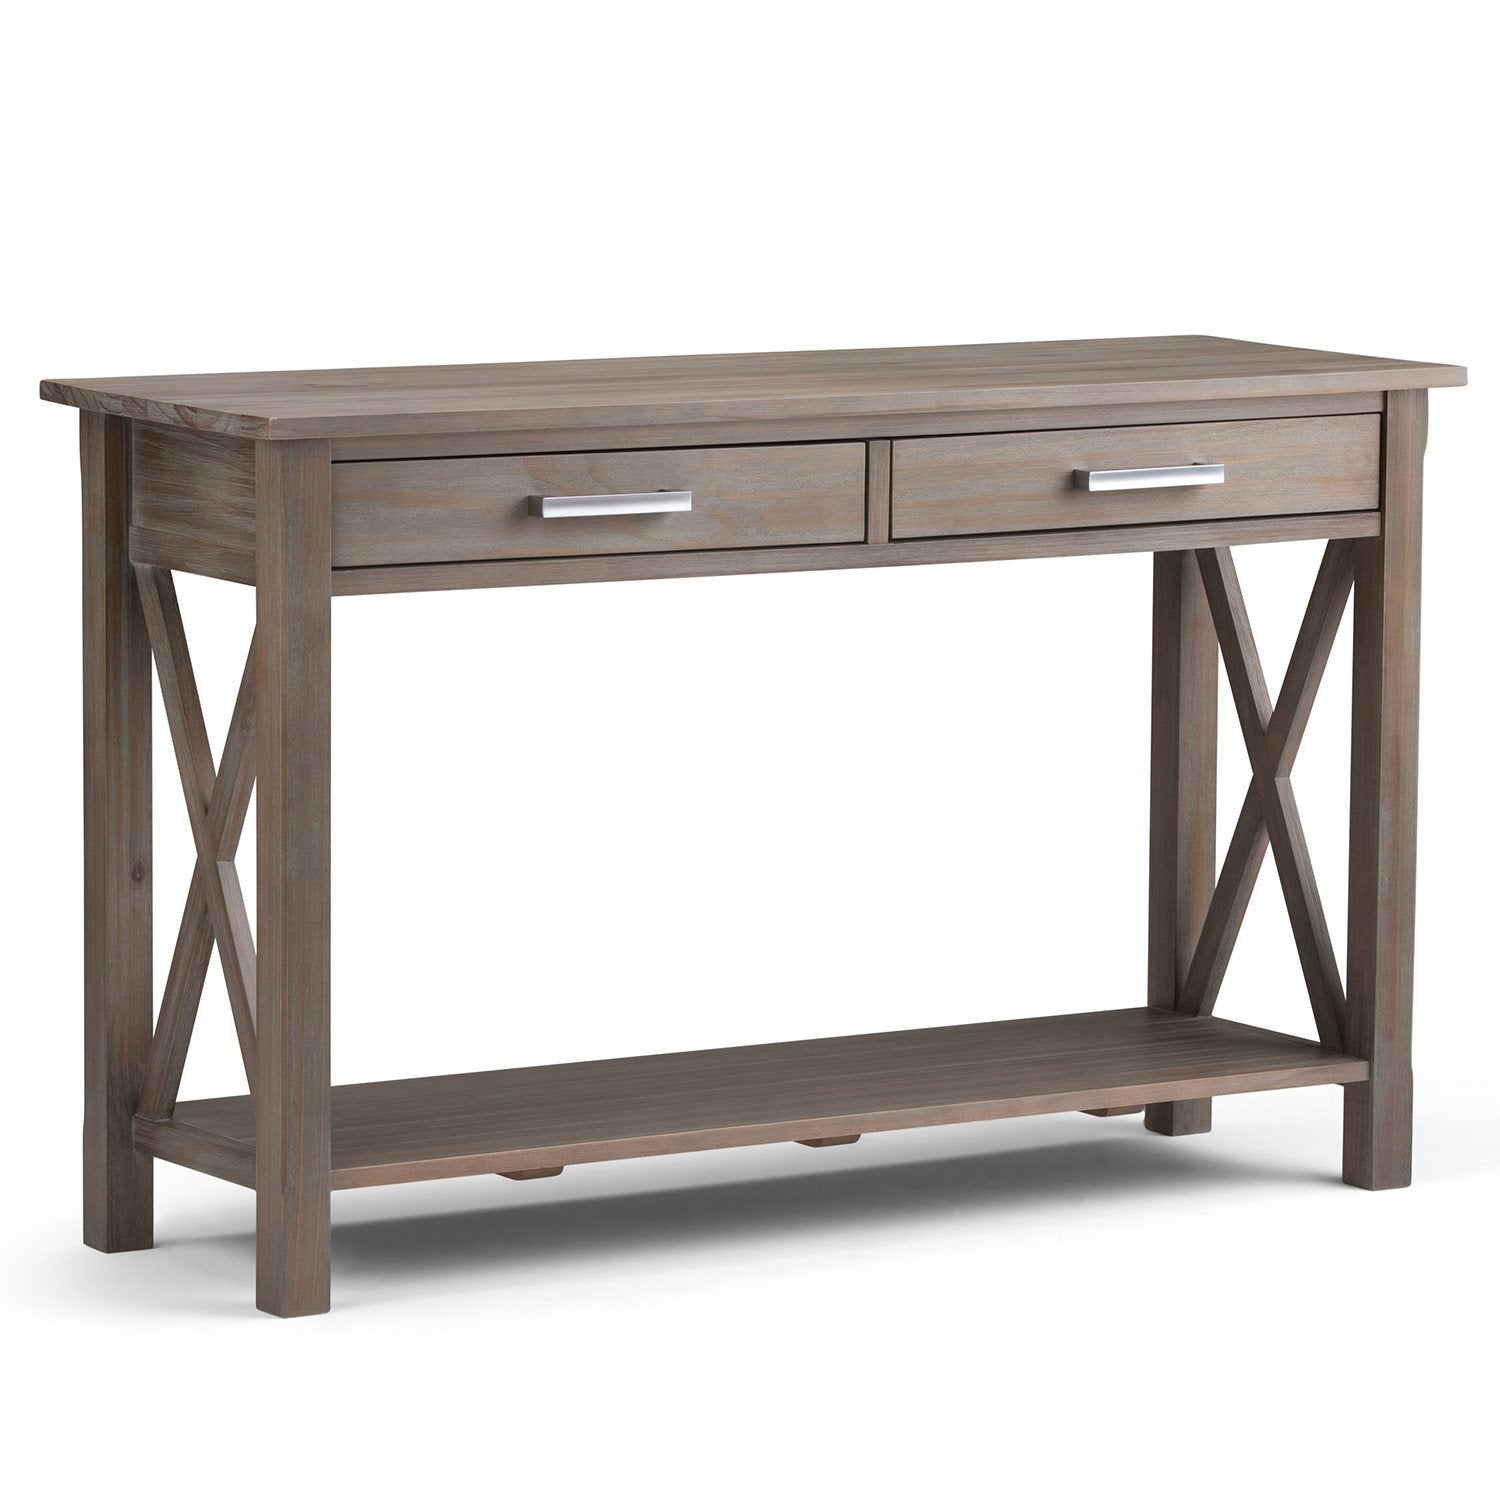 Distressed Grey | Kitchener 47.5 inch Console Sofa Table